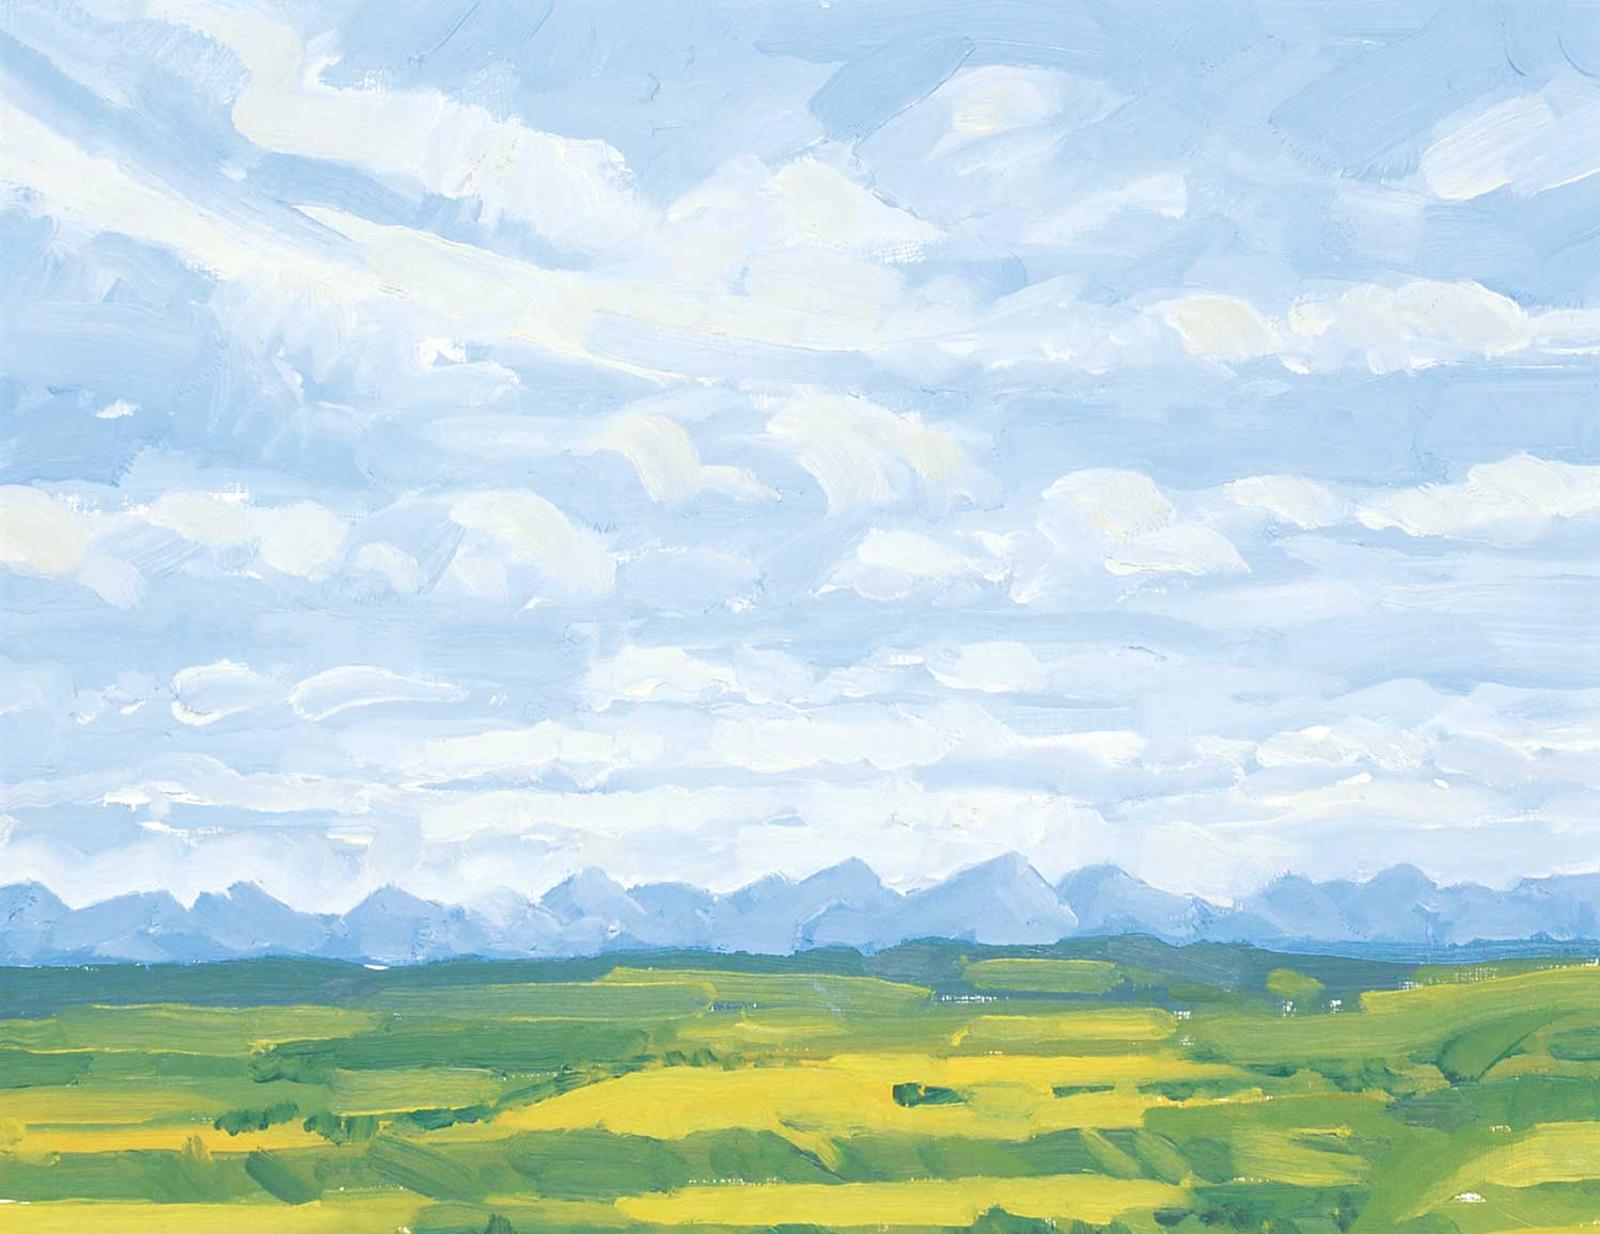 William [Bill] James Parker (1946-2013) - West of Calgary